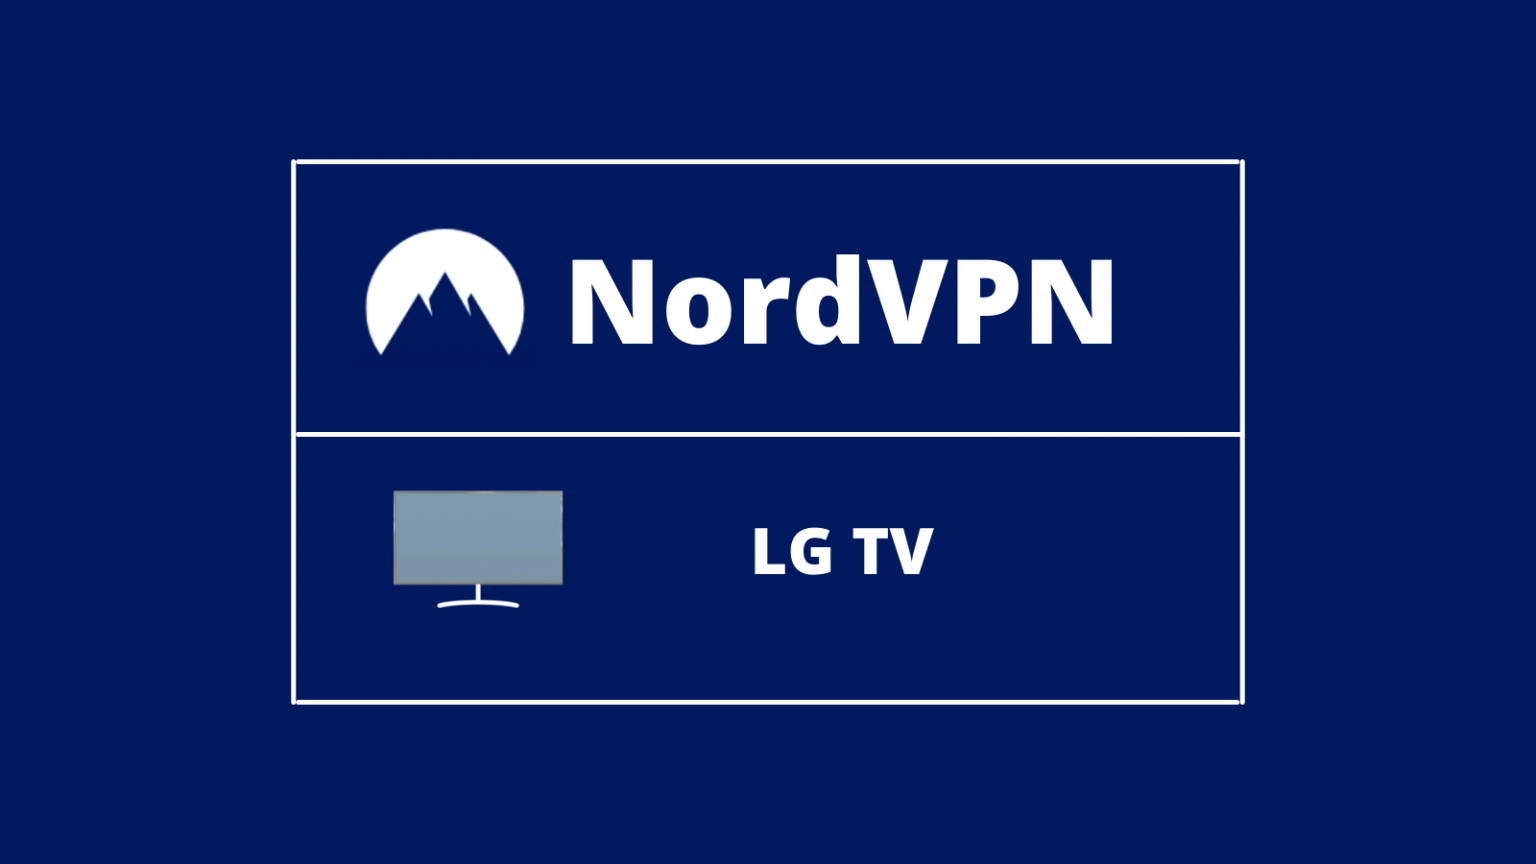 how to download nordvpn on lg tv